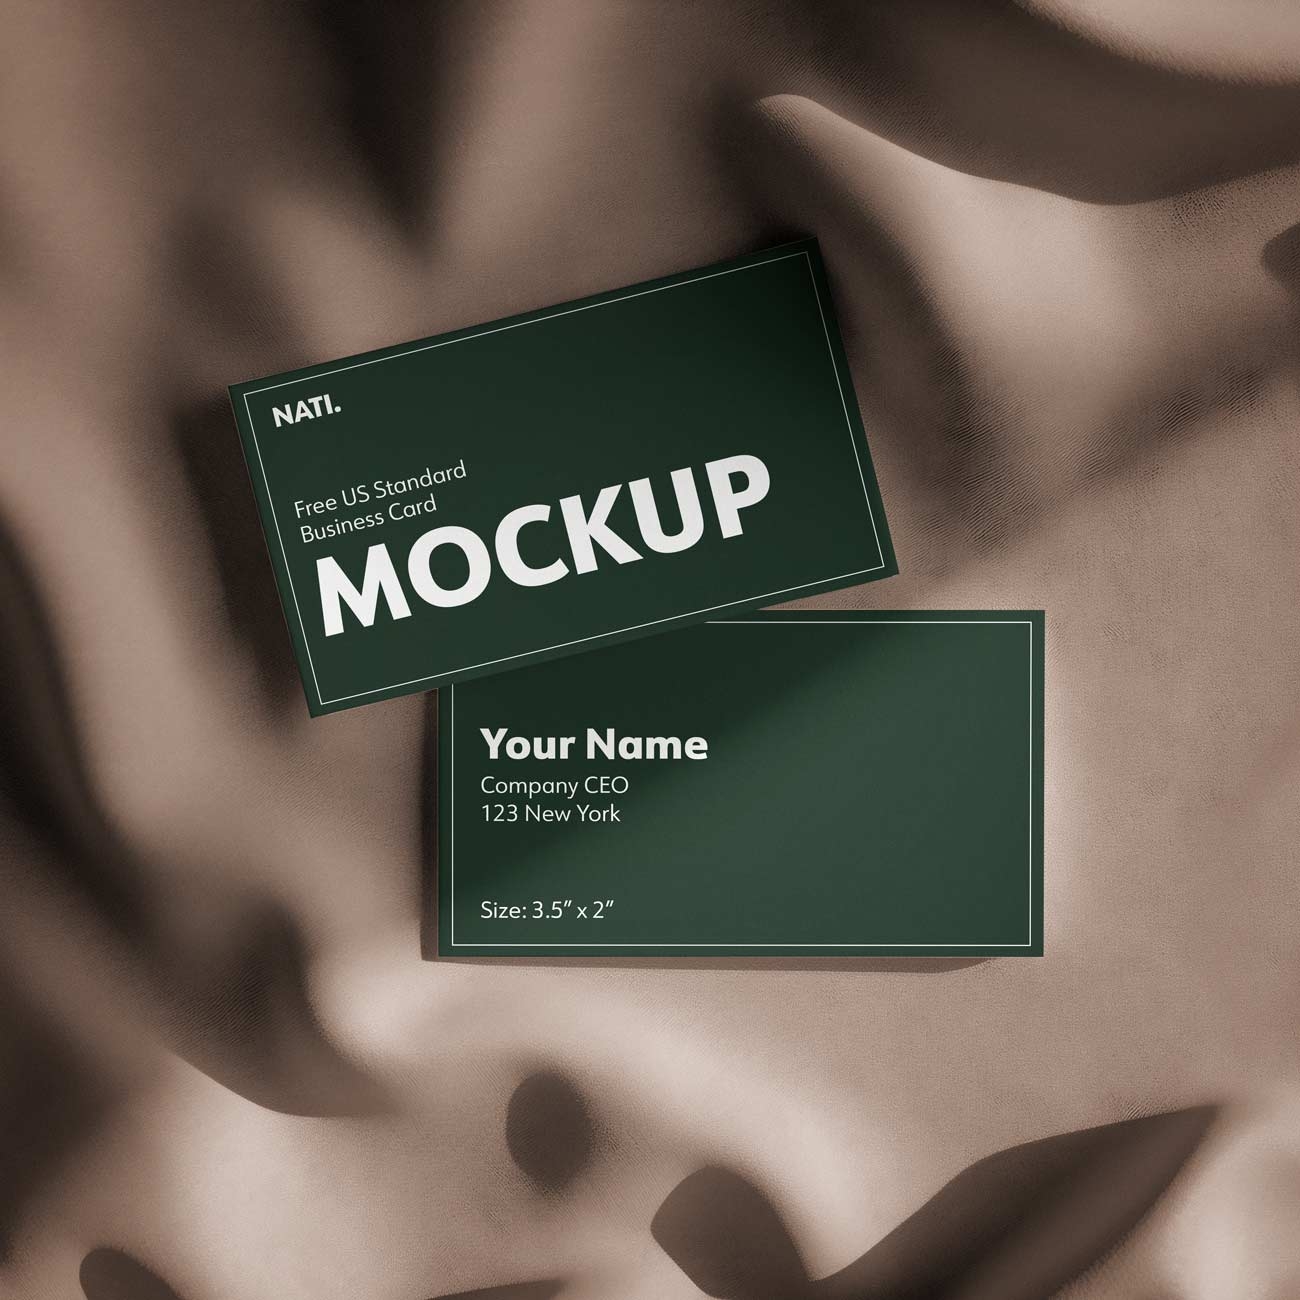 free mockup of a green double sided business card (standard US size) lying on a beige cloth background